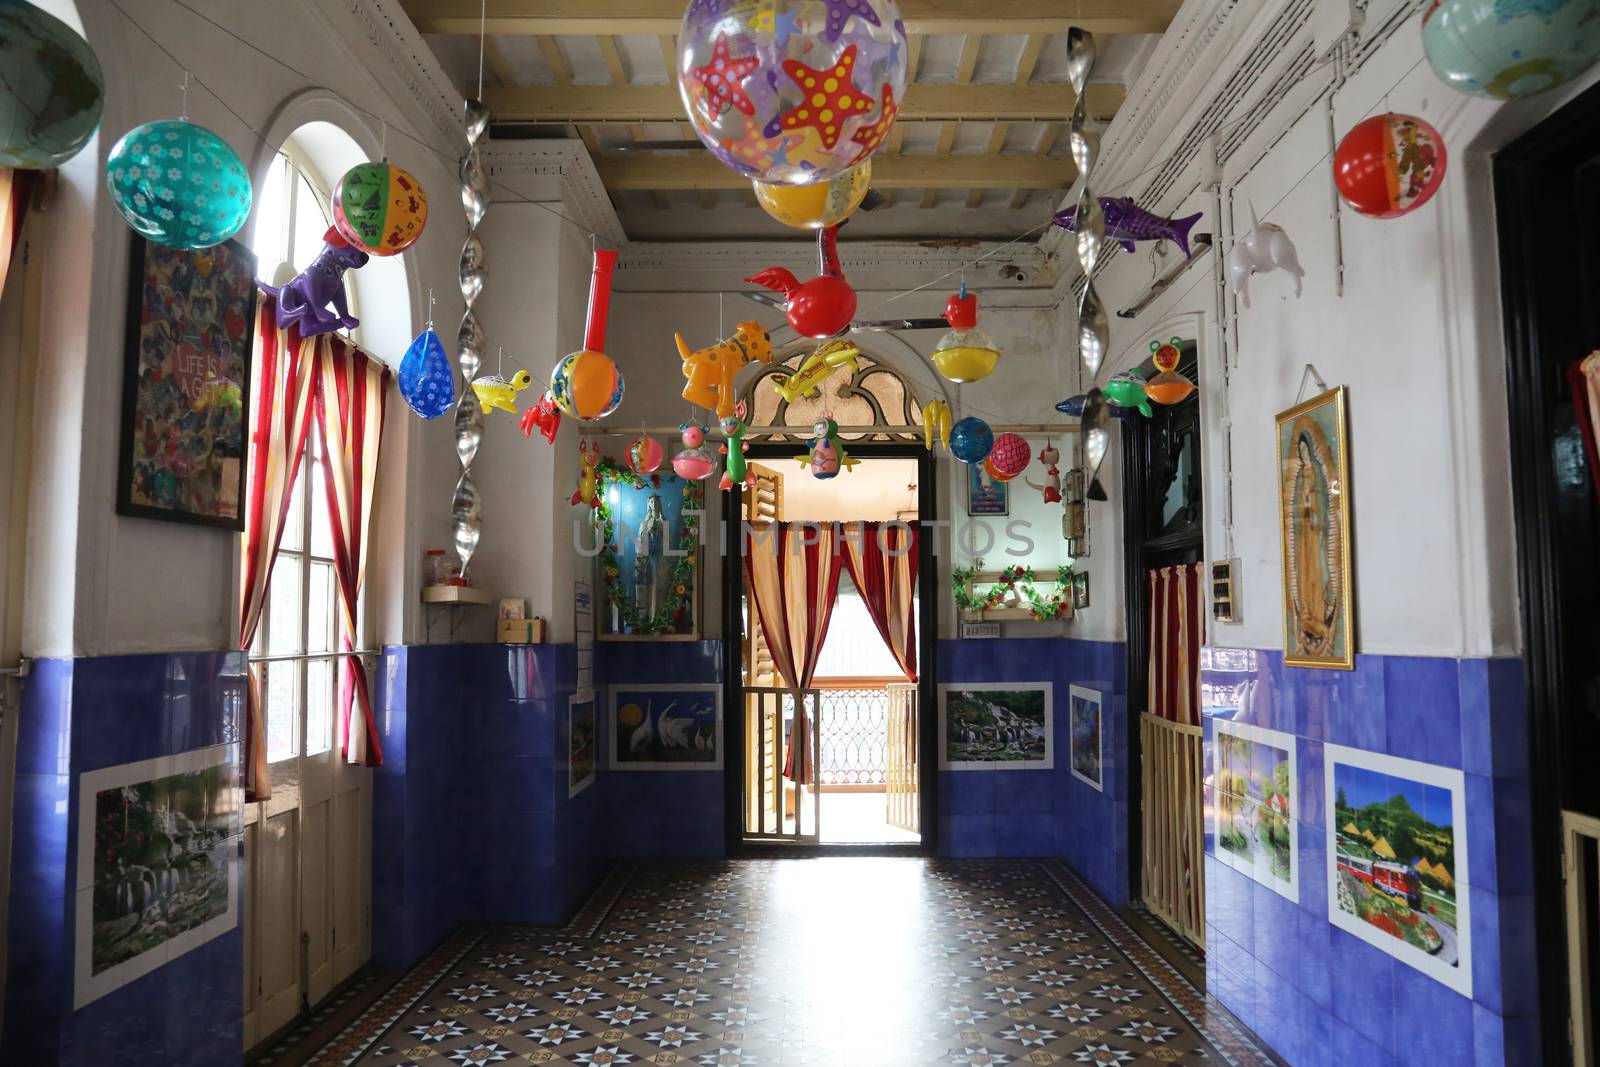 Shishu Bhavan, one of the houses established by Mother Teresa and run by the Missionaries of Charity in Kolkata, India on February 11, 2014.